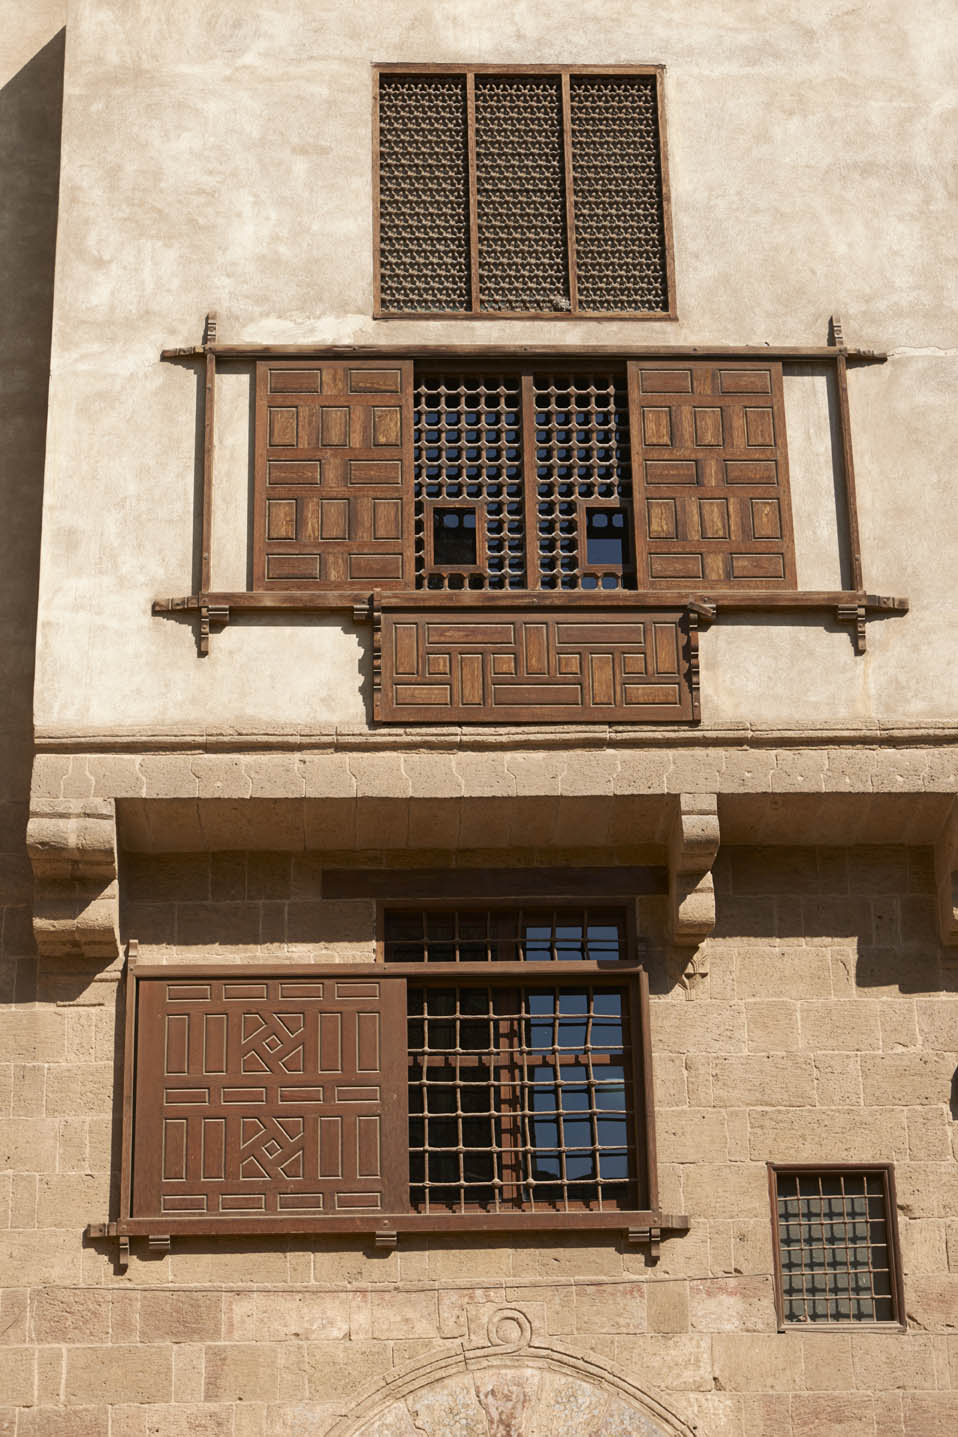 Manzil Waqf Ibrahim Agha Mustahfizan - Detail of wooden screens and grilles on facade